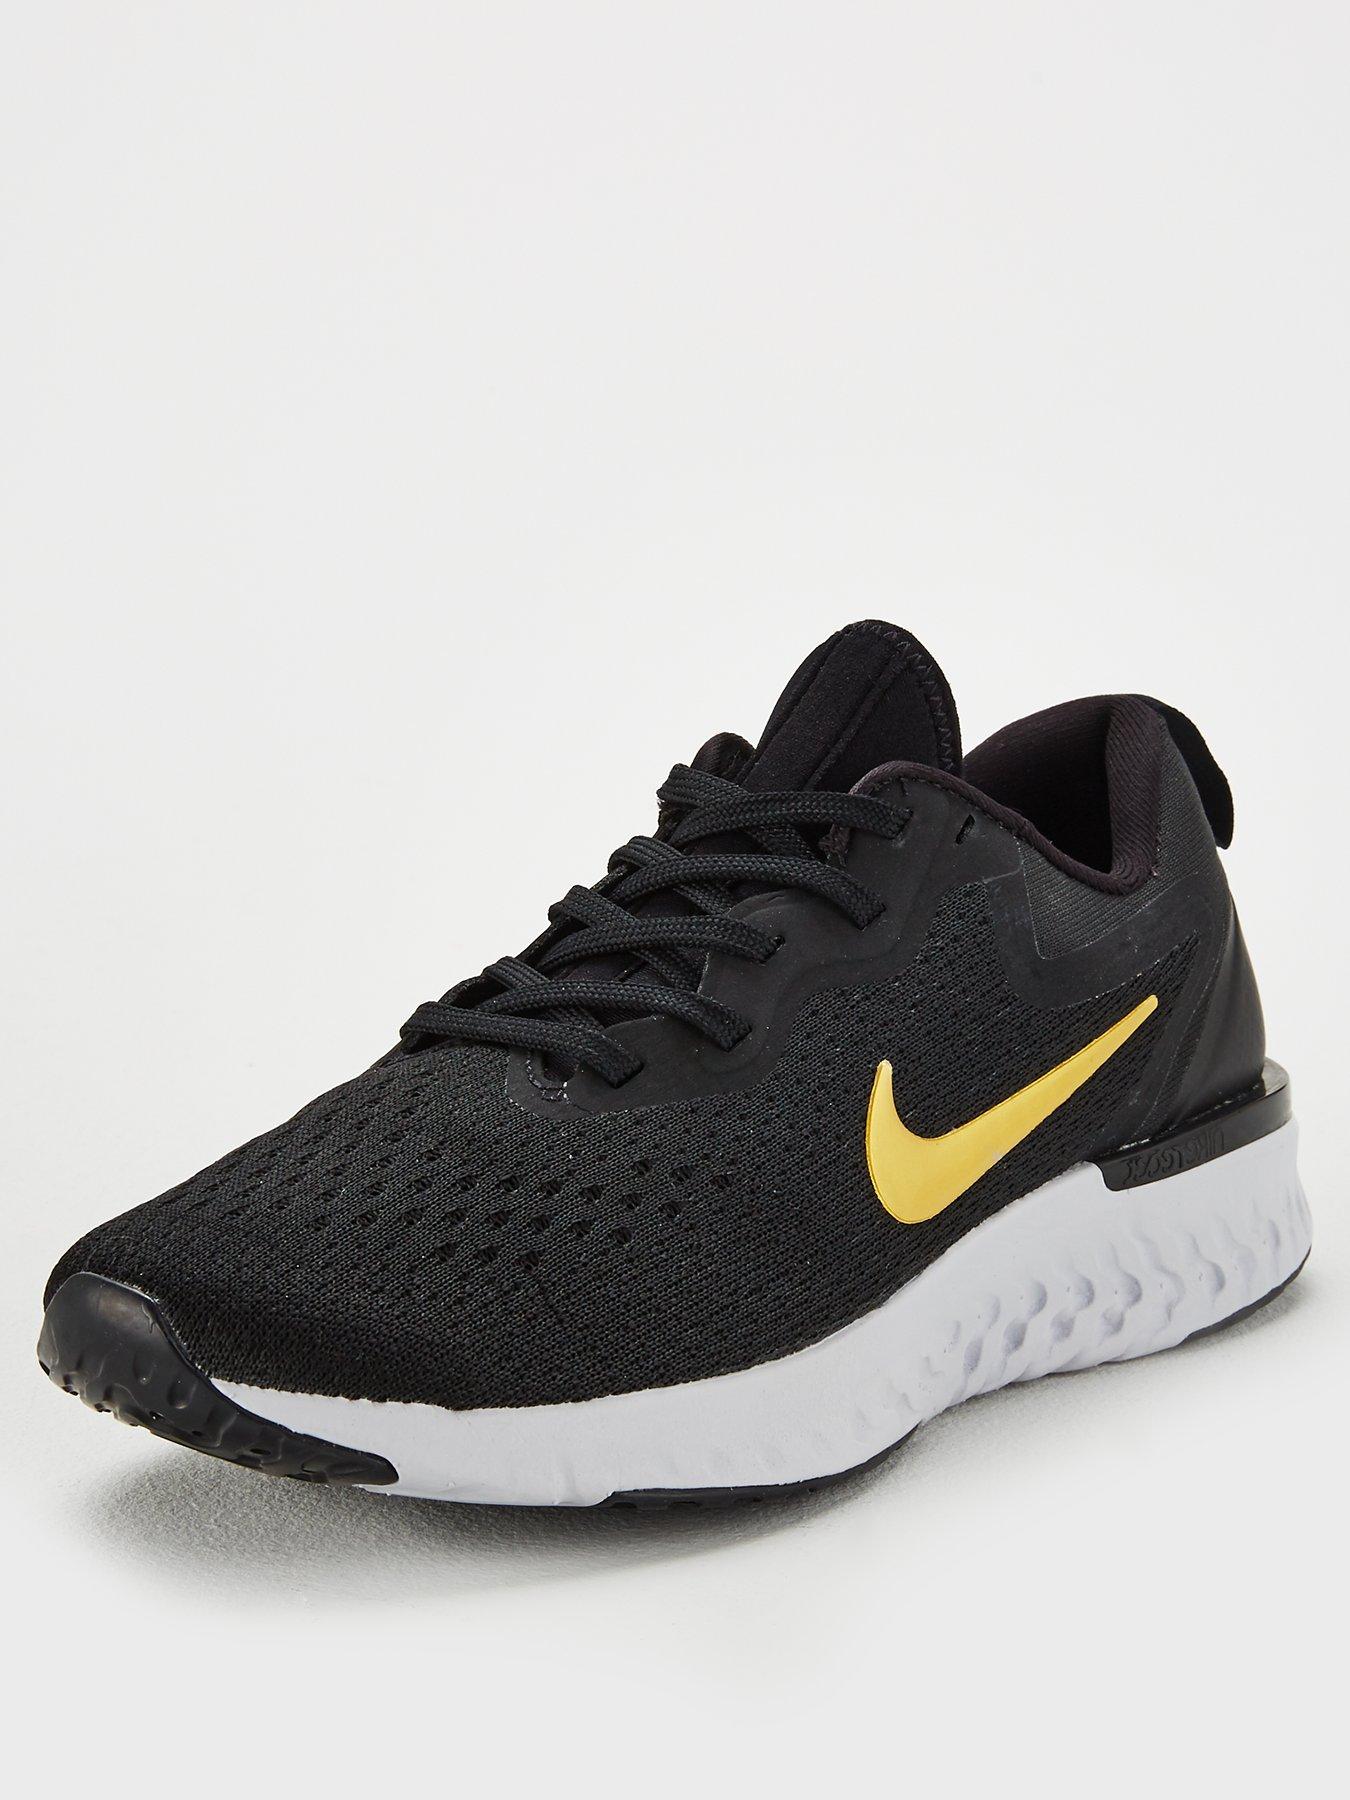 nike odyssey react black and gold